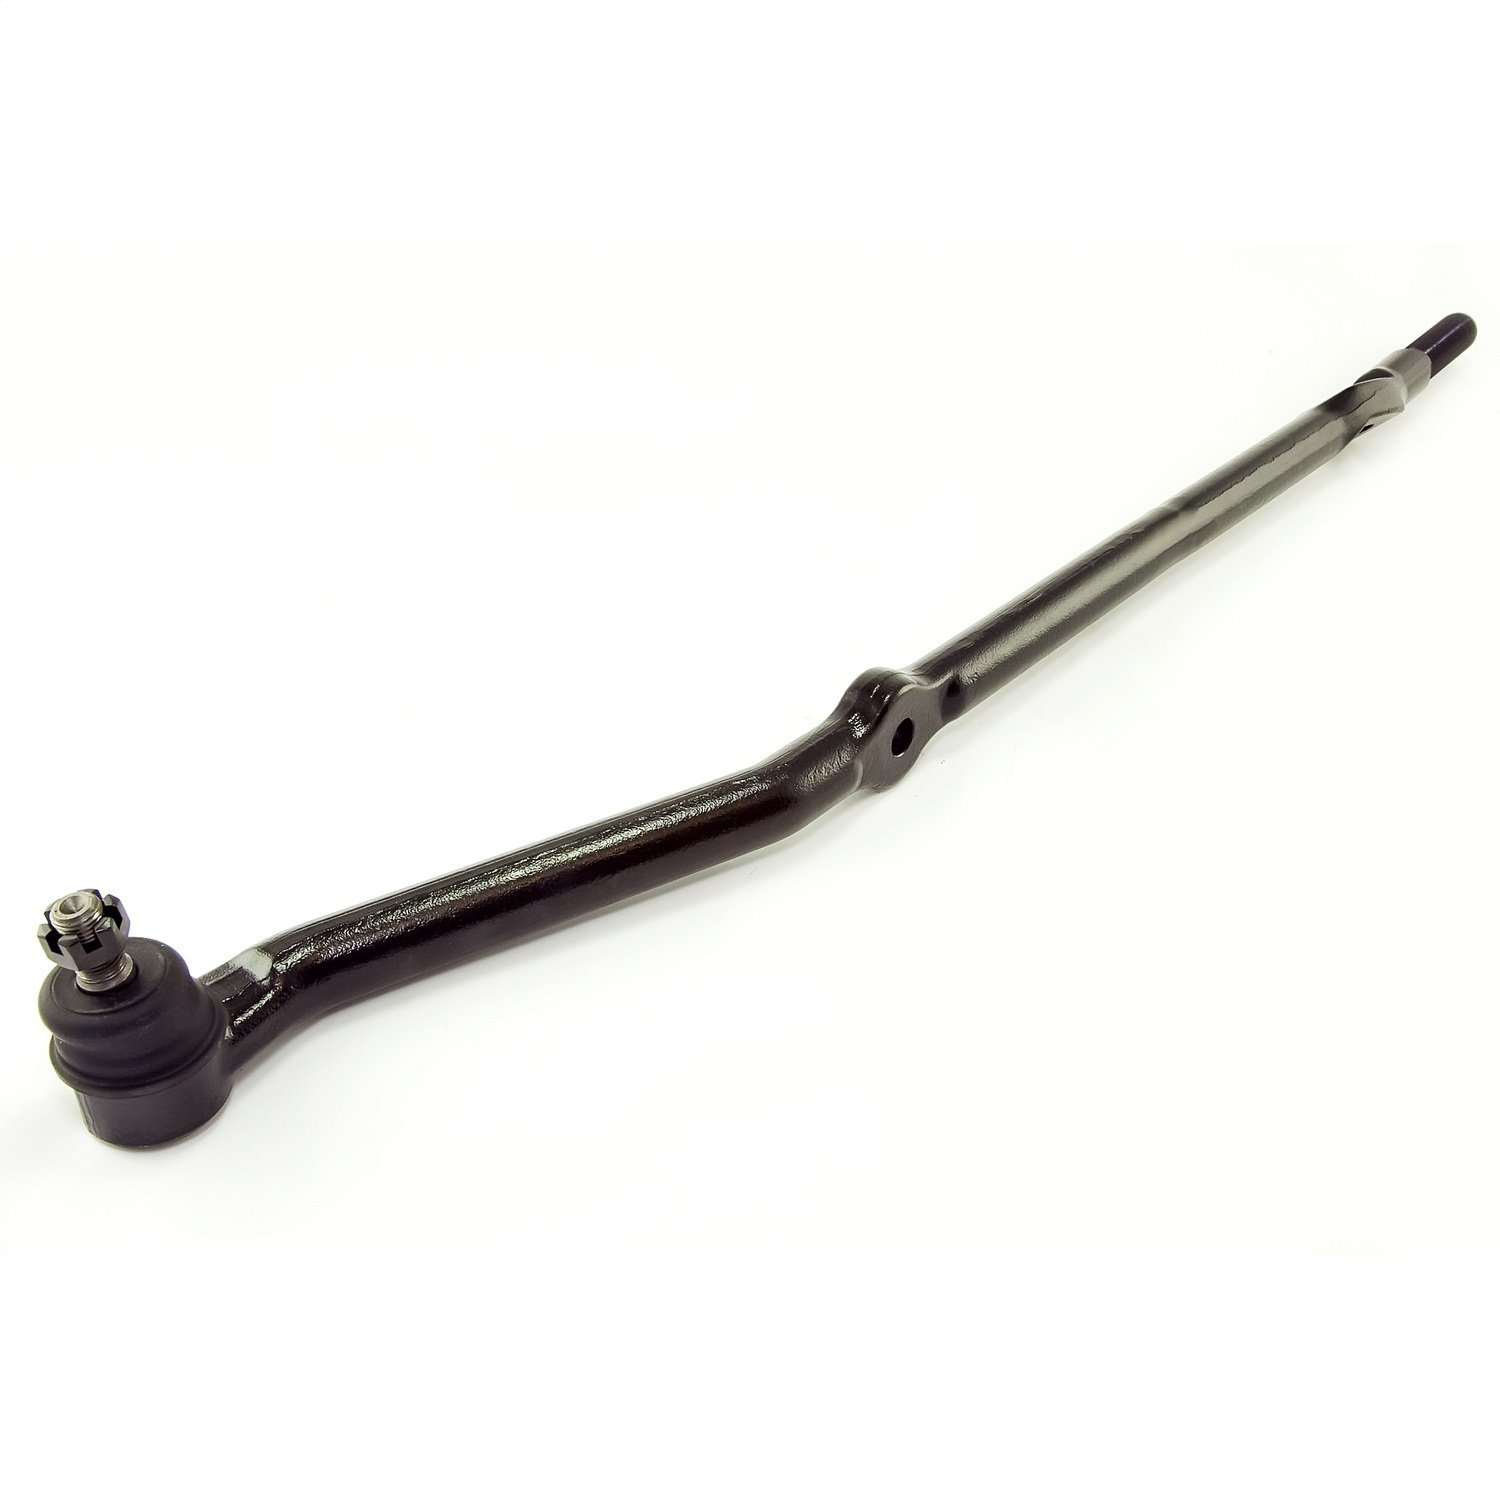 This long tie rod from Omix-ADA fits 93-98 Jeep Grand Cherokees ZJ with a 4.0L engine